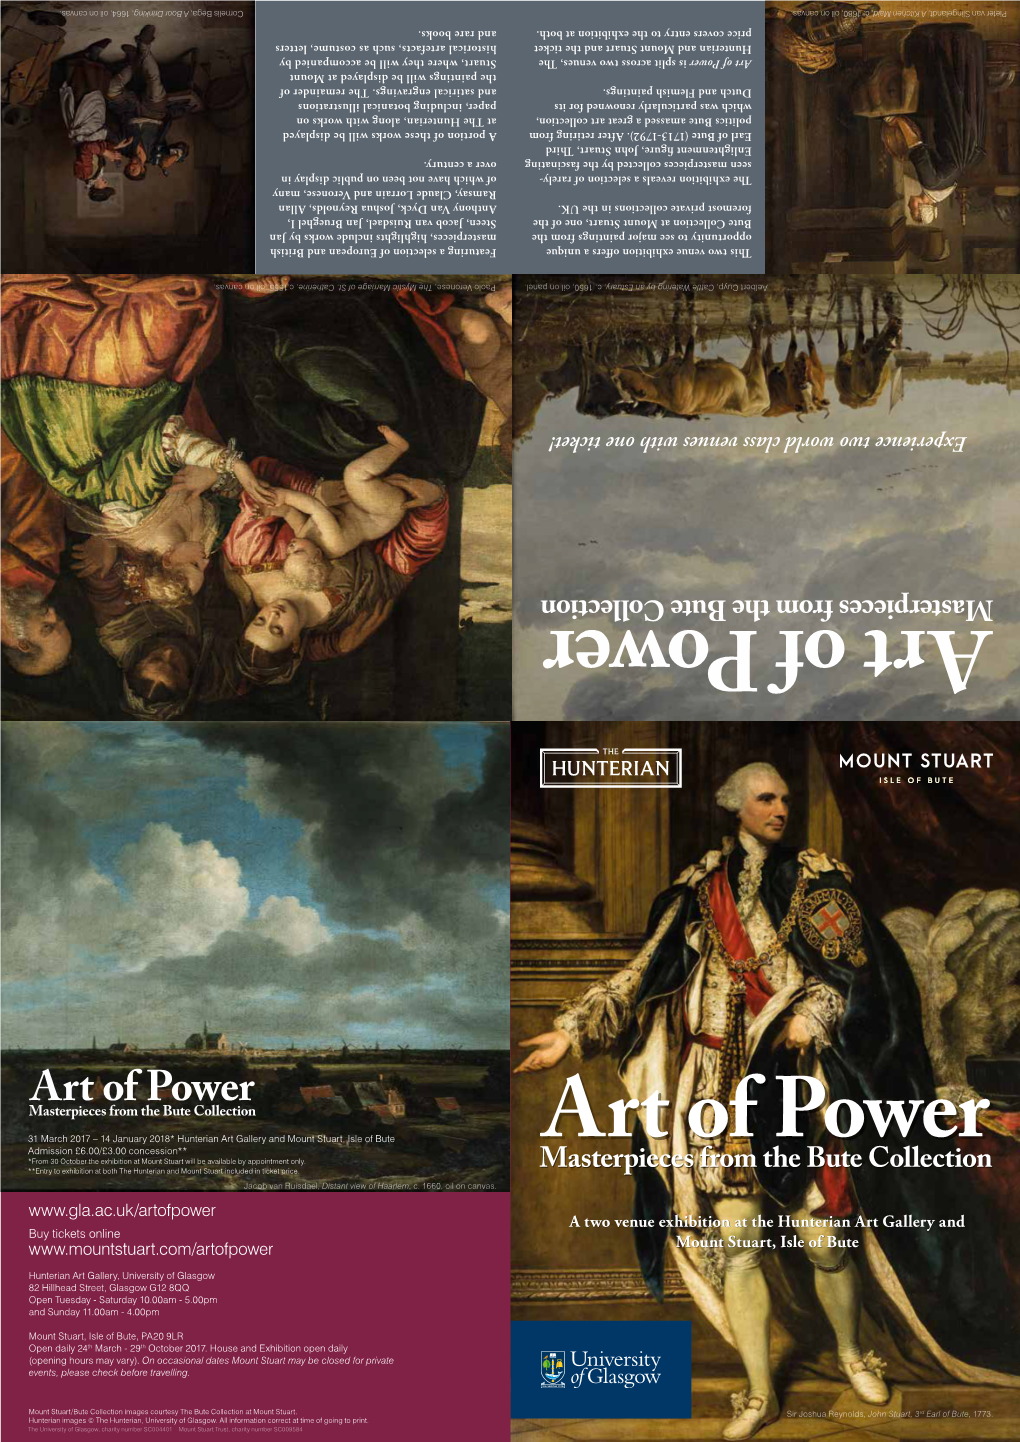 Download the Art of Power Exhibition Leaflet